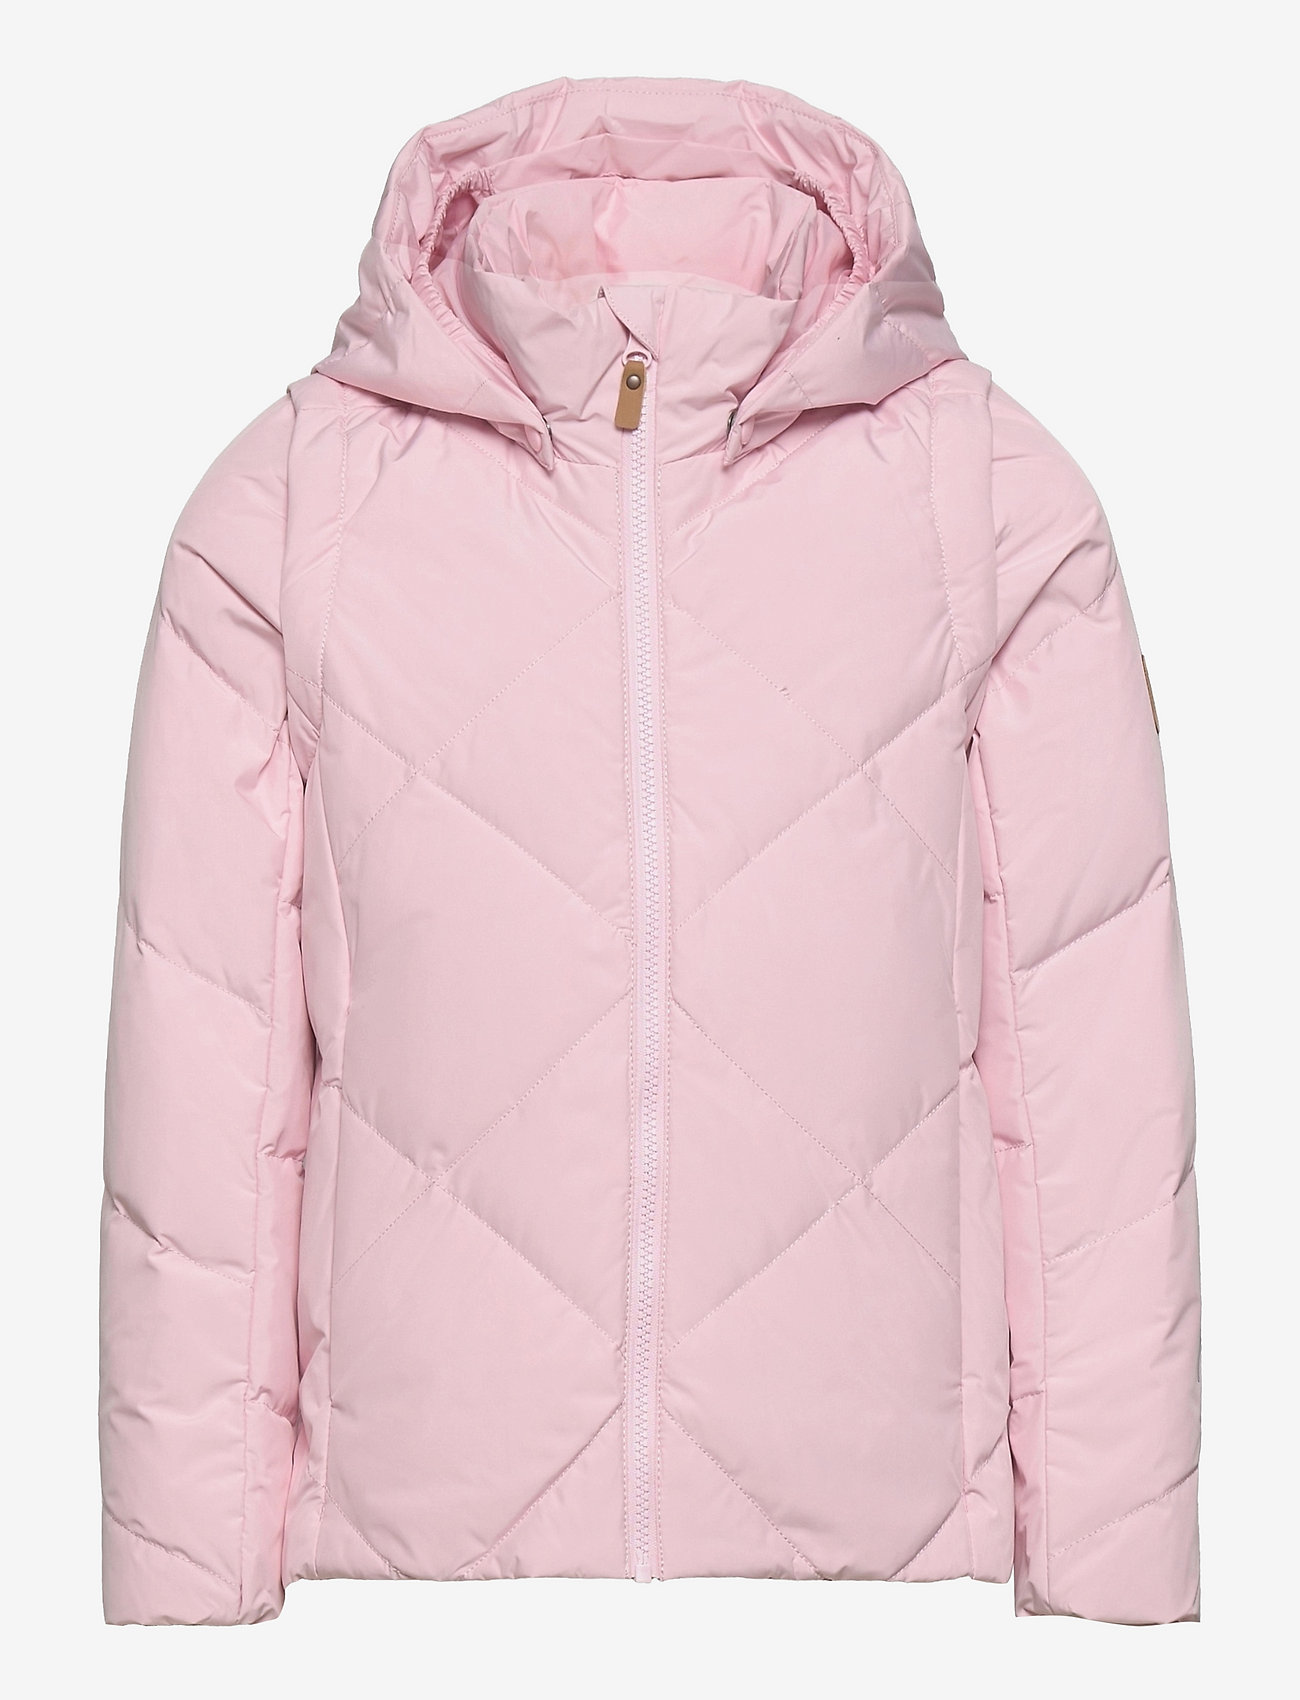 Reima - Kids' down jacket Paahto - puffer & padded - pale rose - 0